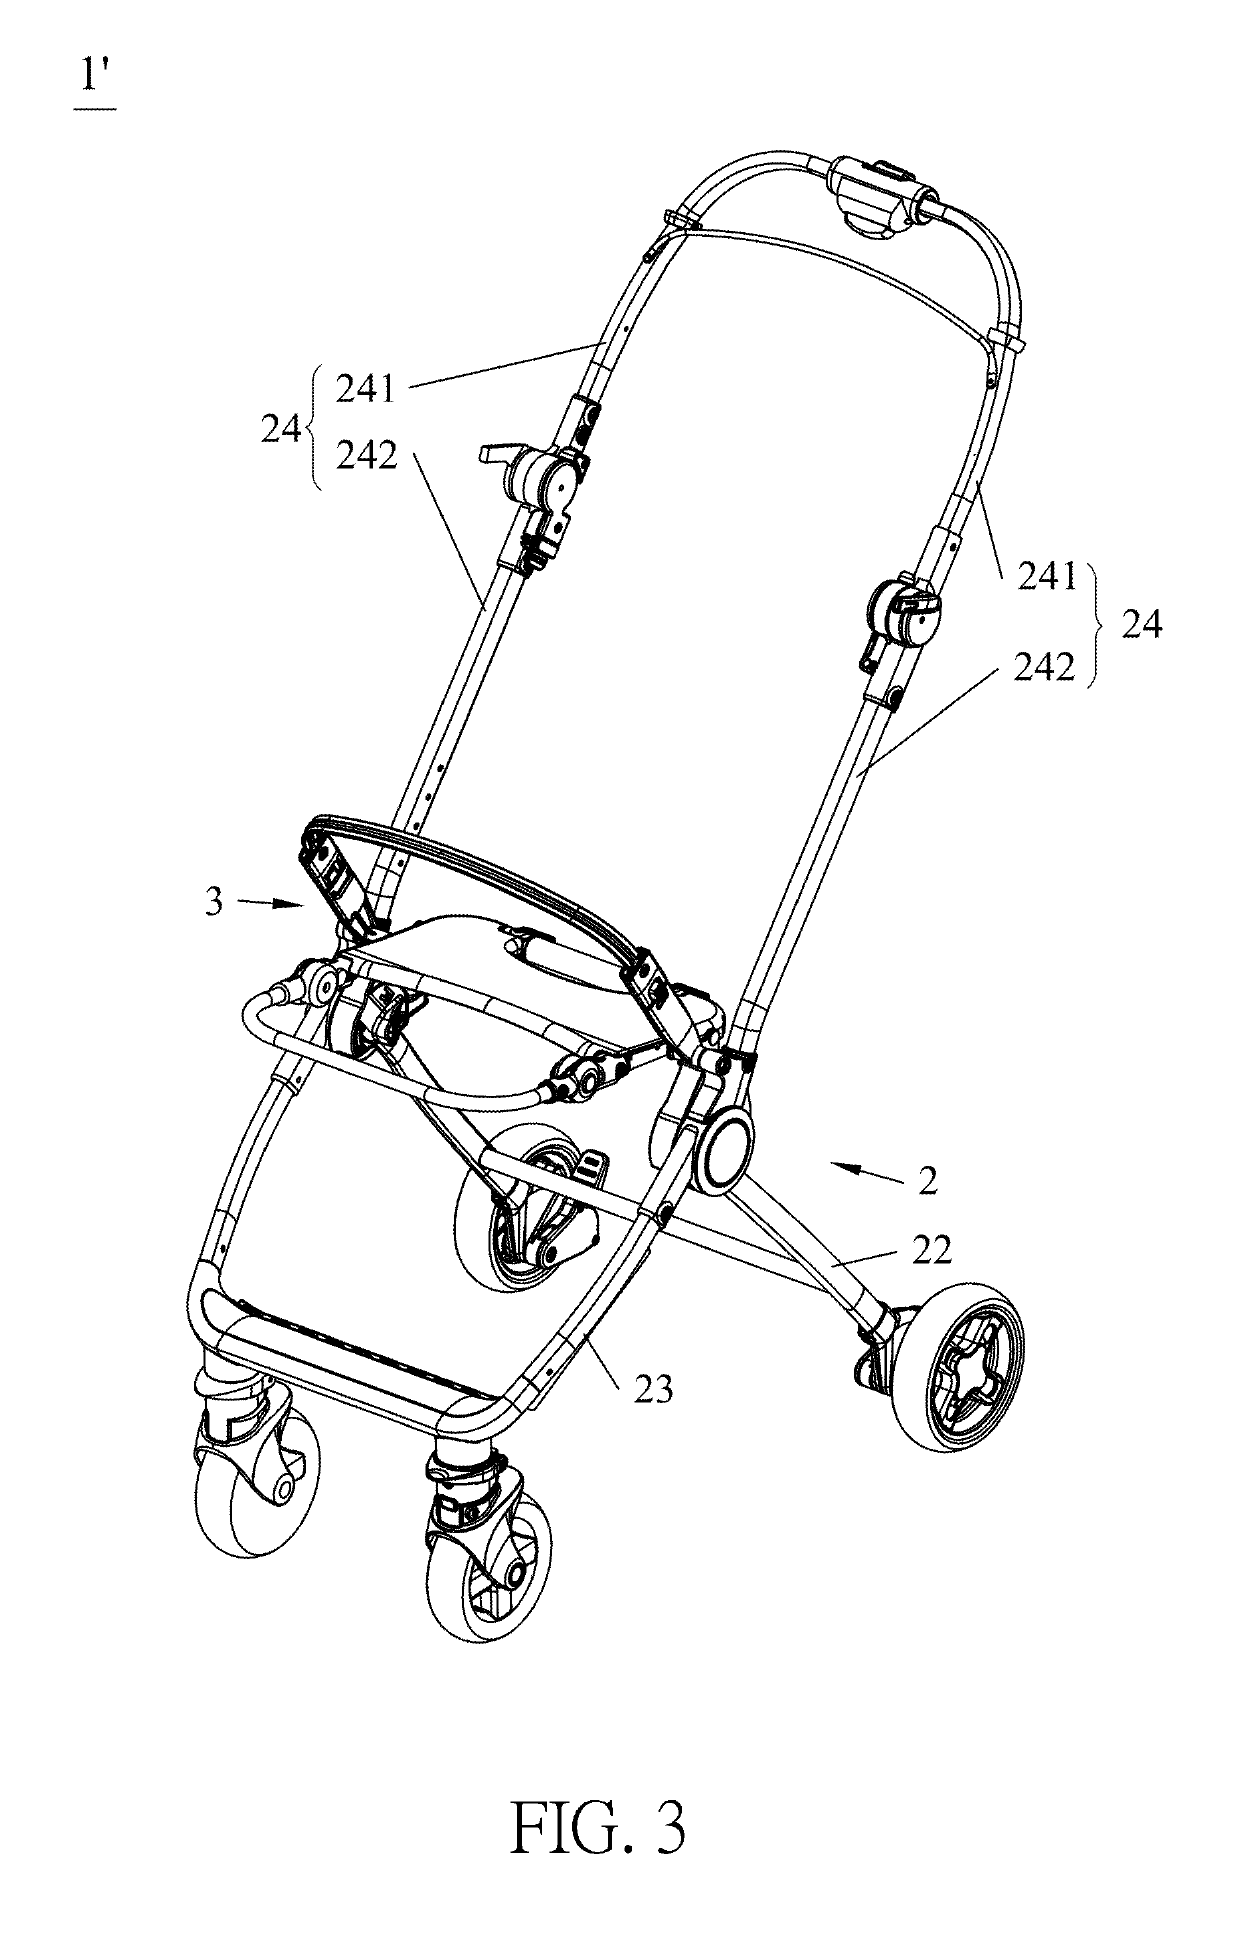 Baby stroller with a folding mechanism triggered by a child carrier